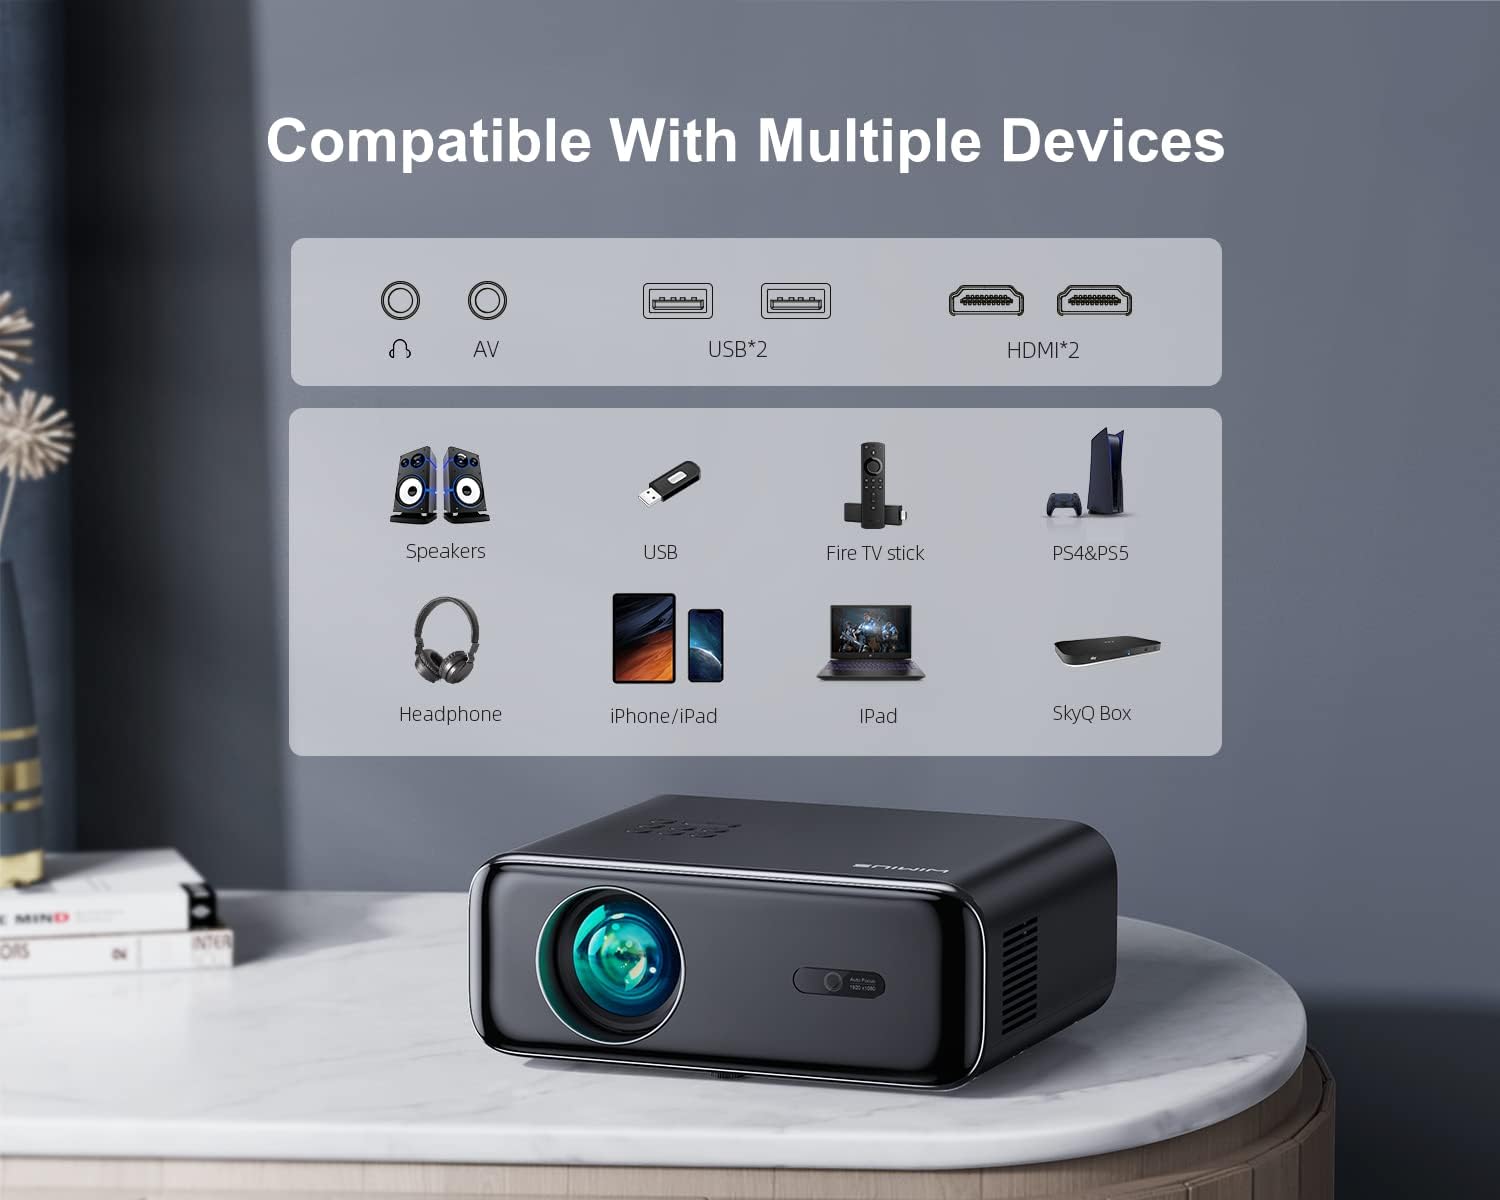 WiMiUS Home Projector P63 – WiMiUS Official